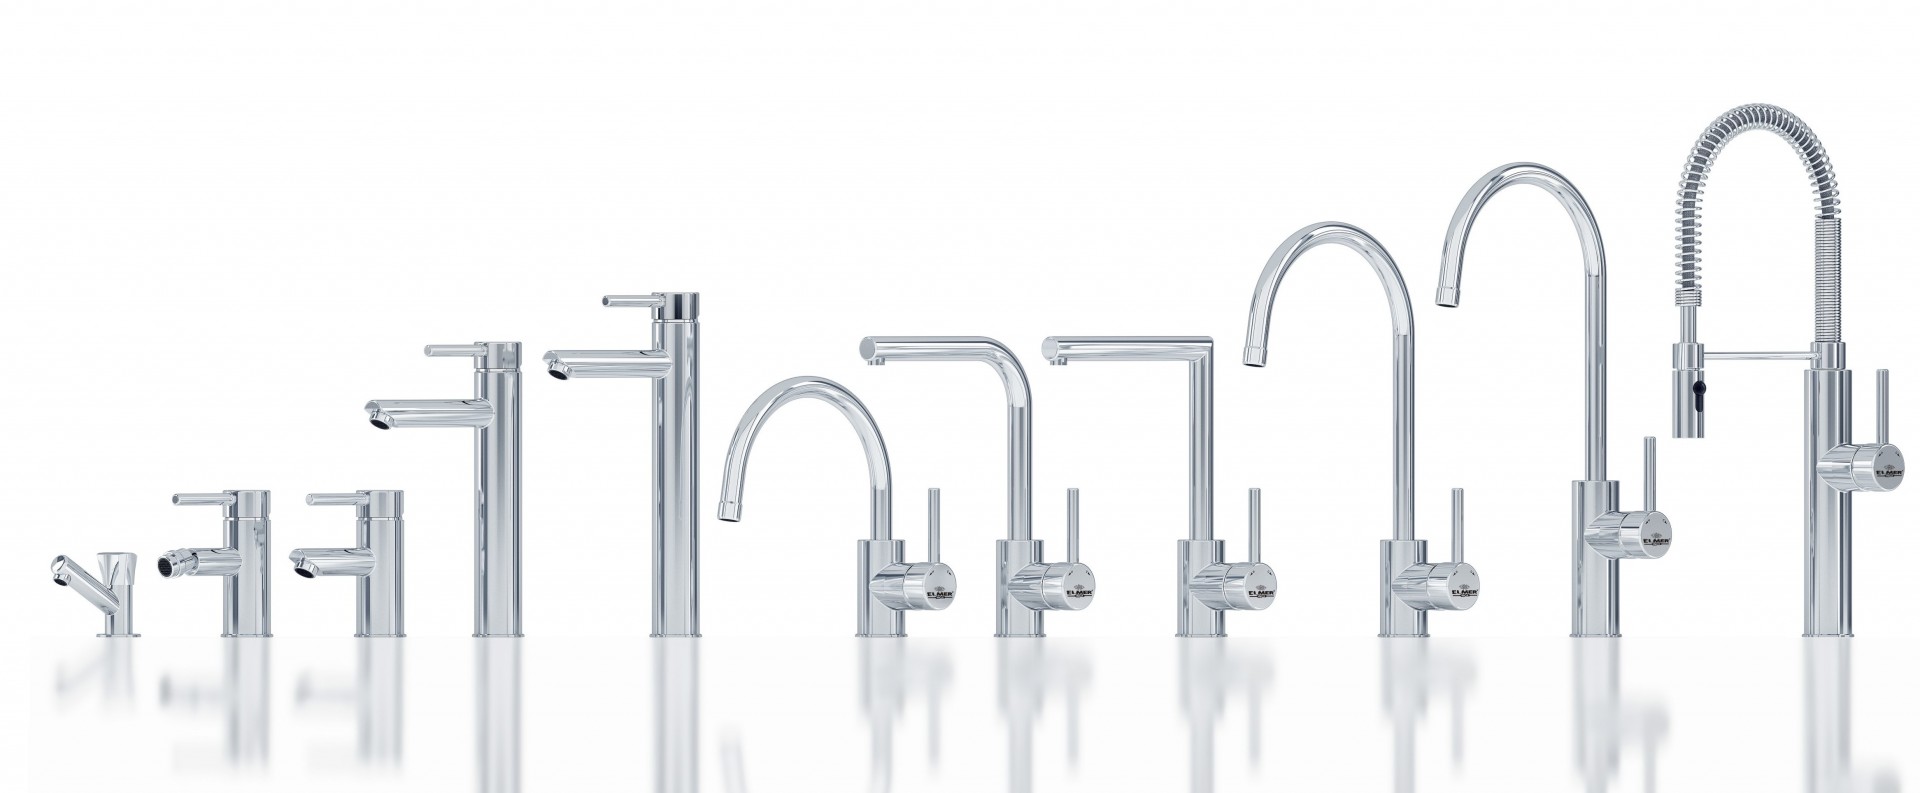 New line of stainless steel fittings